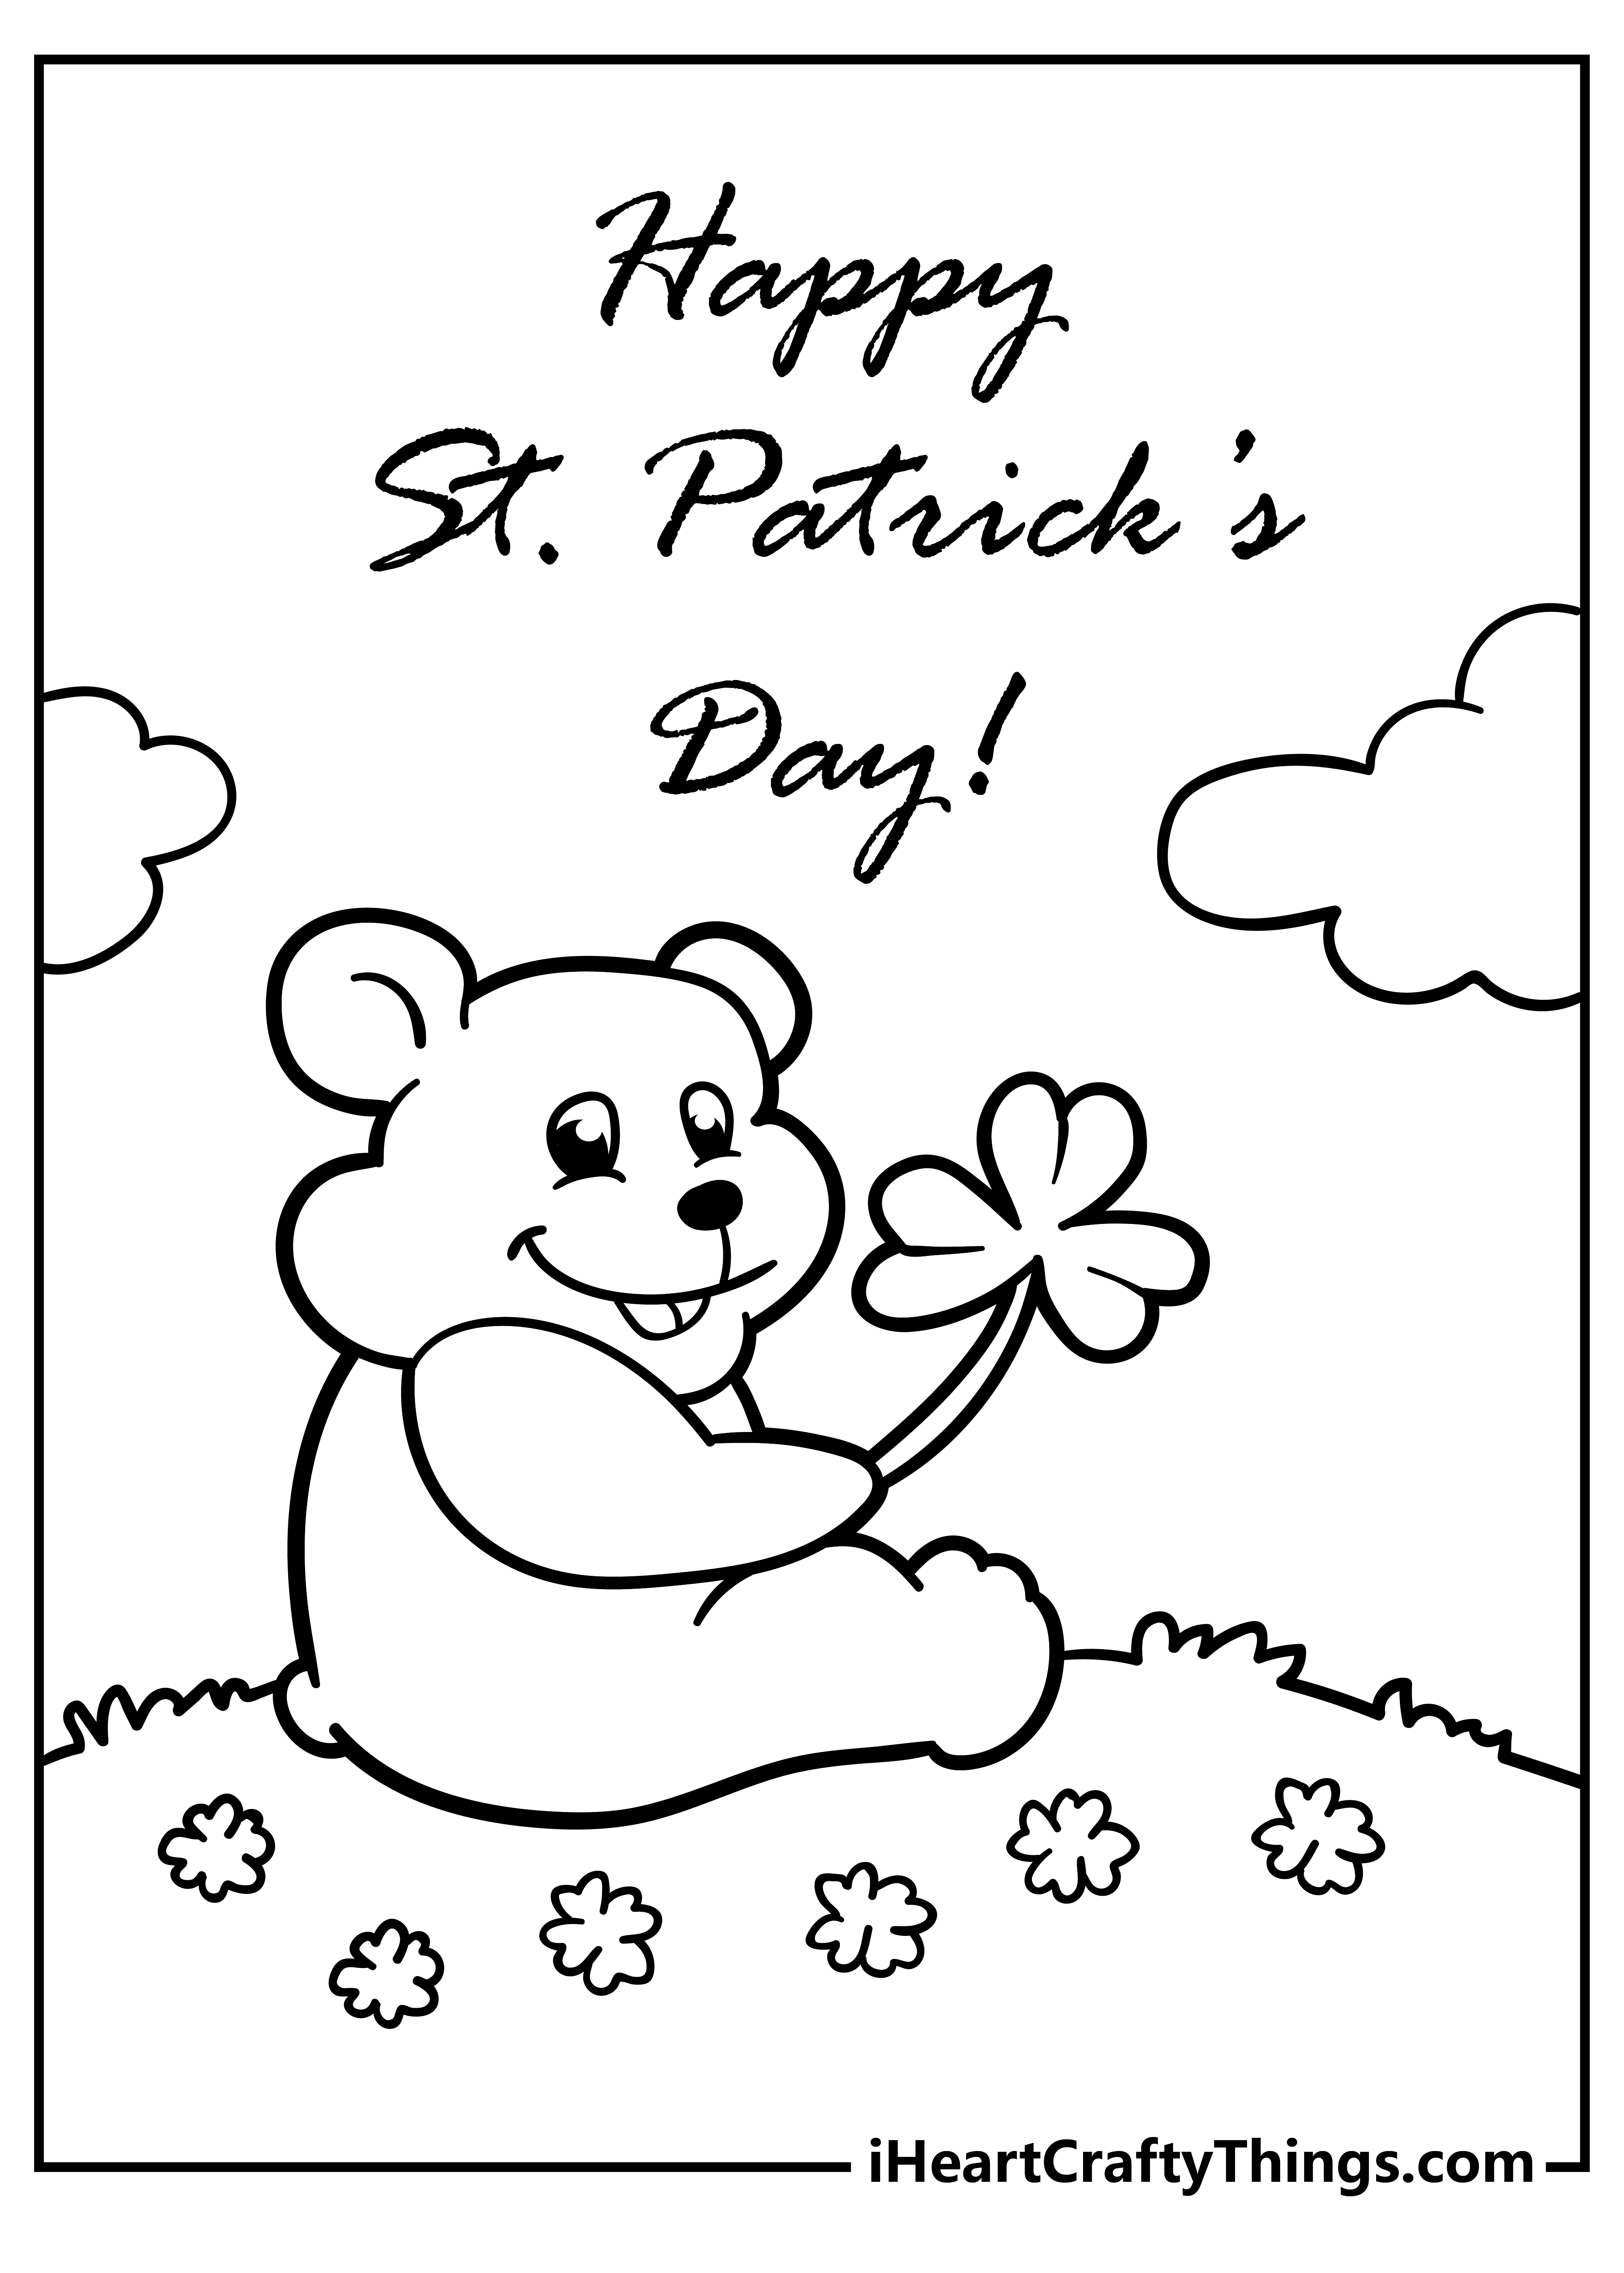 St Patrick’s Day Coloring Pages for kids free download